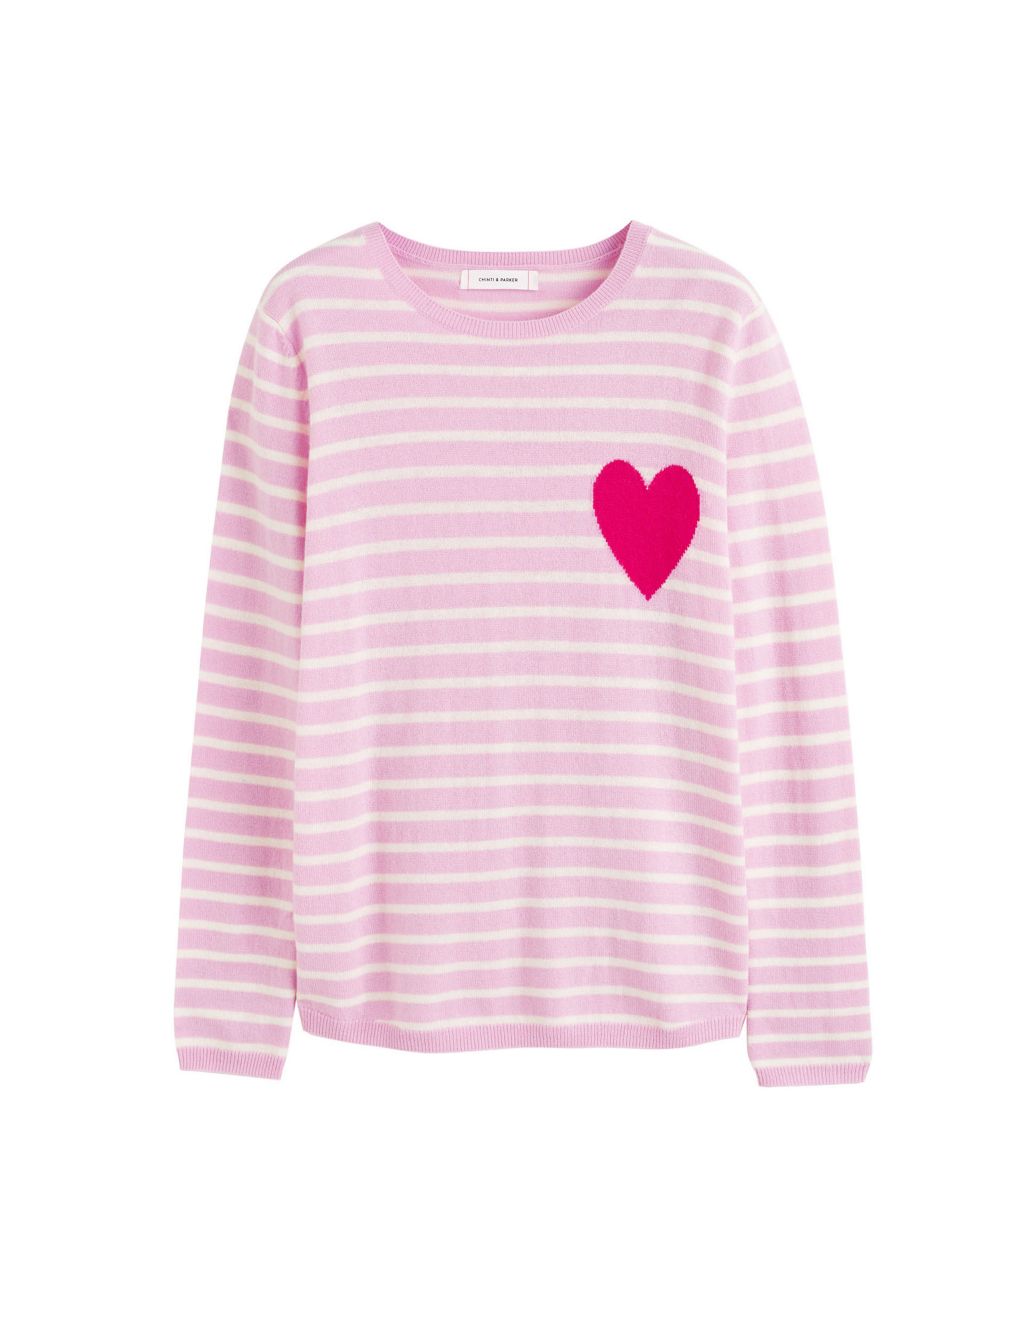 Wool Rich Striped Sweatshirt with Cashmere image 2